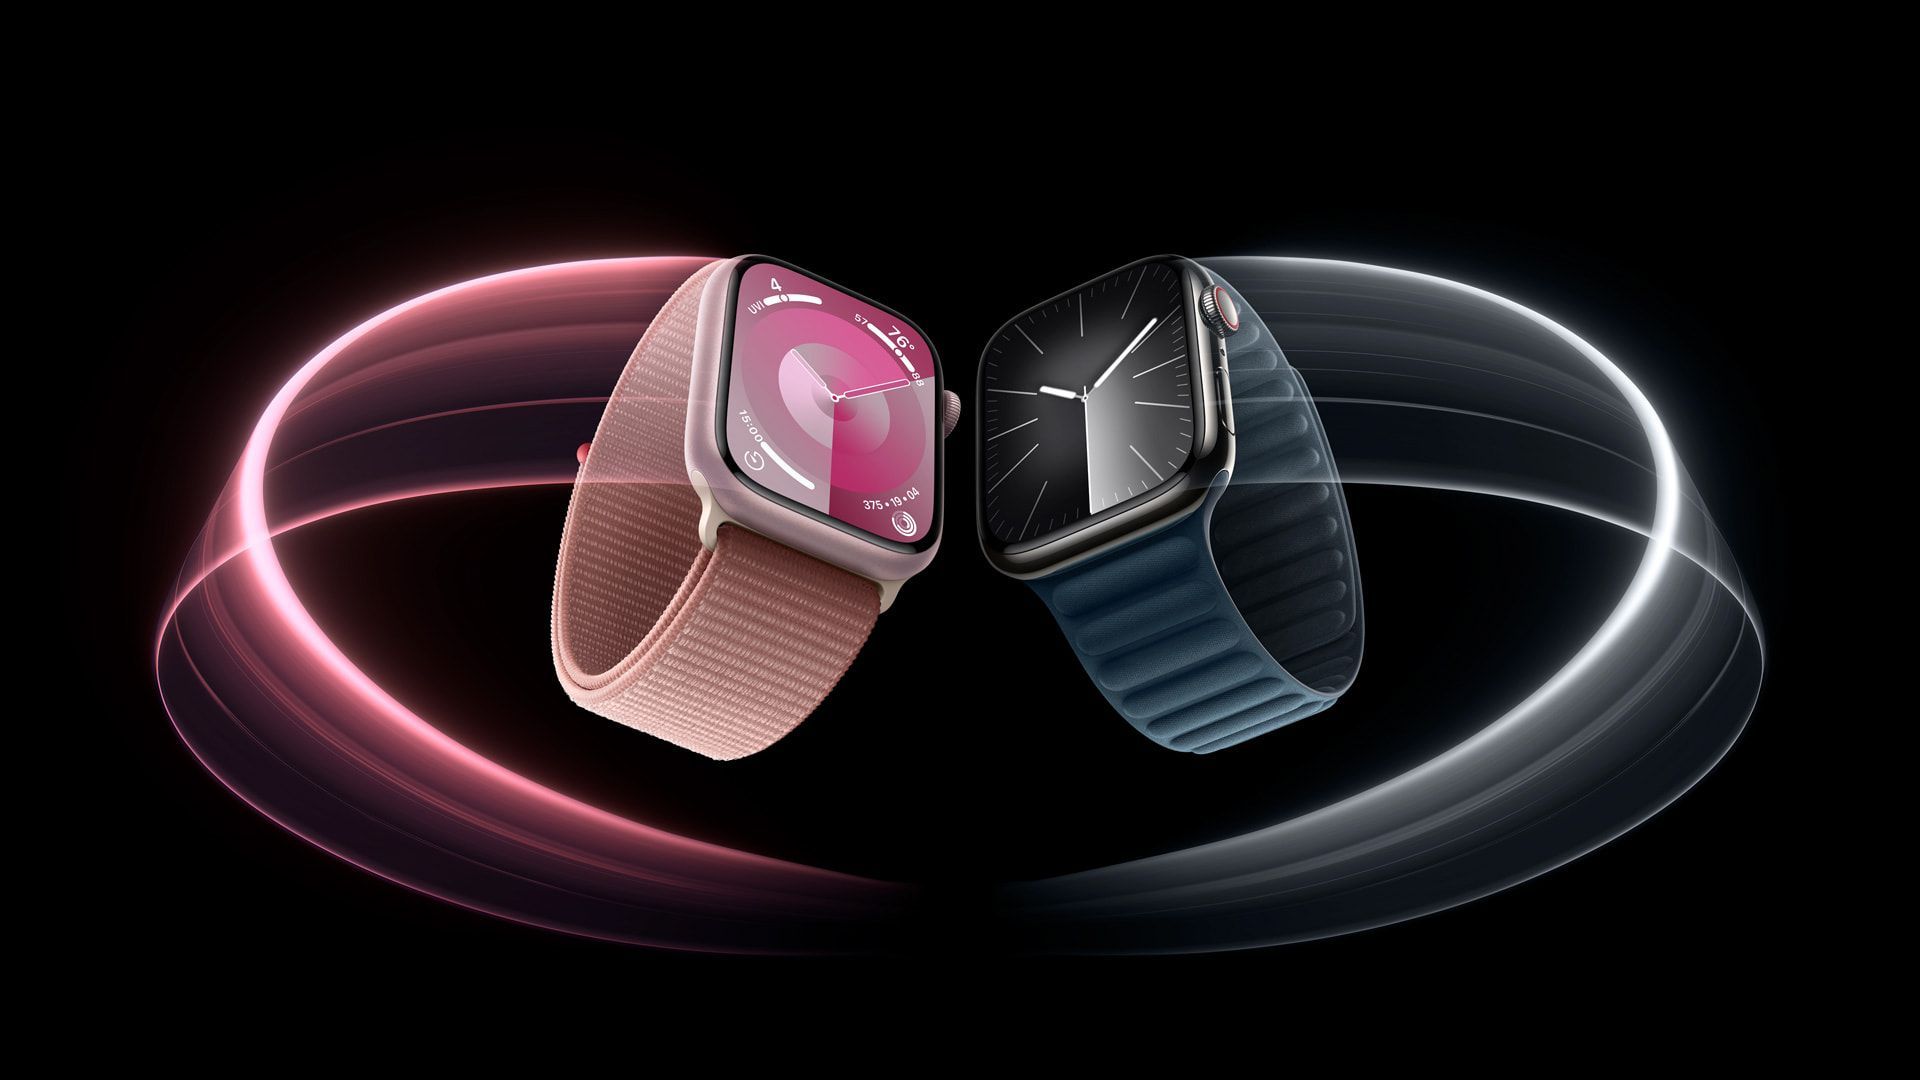 New Apple Watch Double Tap feature